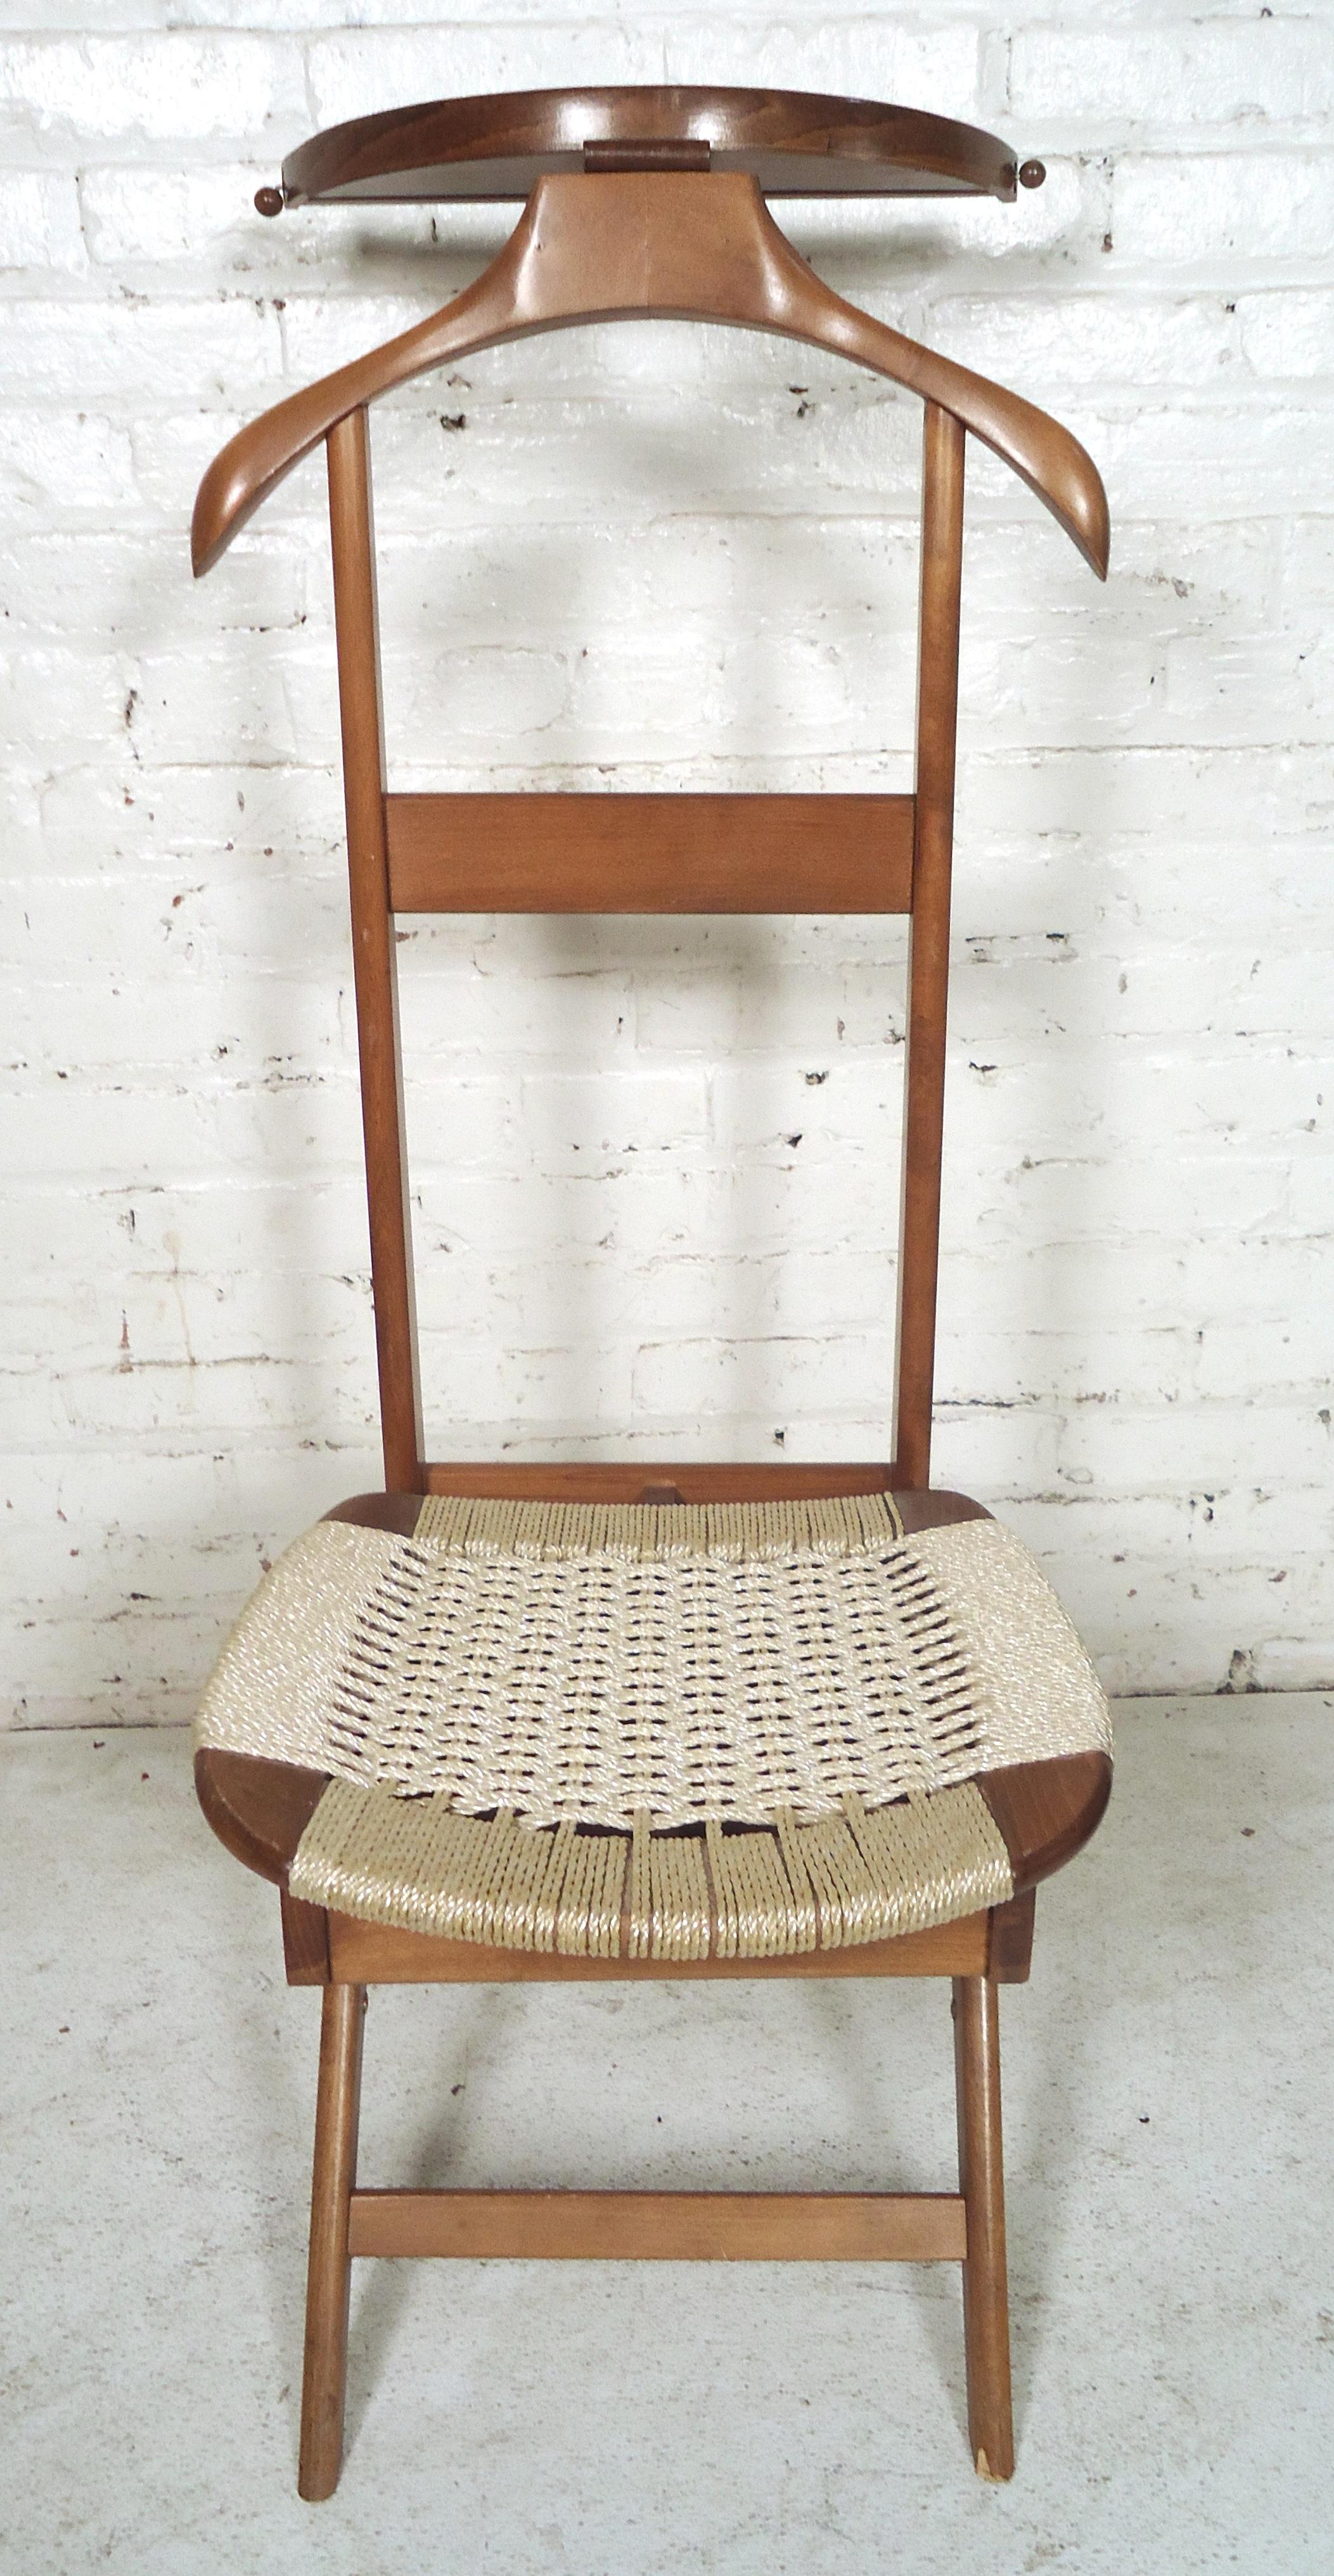 Italian style Mid-Century Modern men's valet chair with woven seat. Beautiful angled legs, straight back and sculpted coat rack. 

(Please confirm item location - NY or NJ - with dealer).